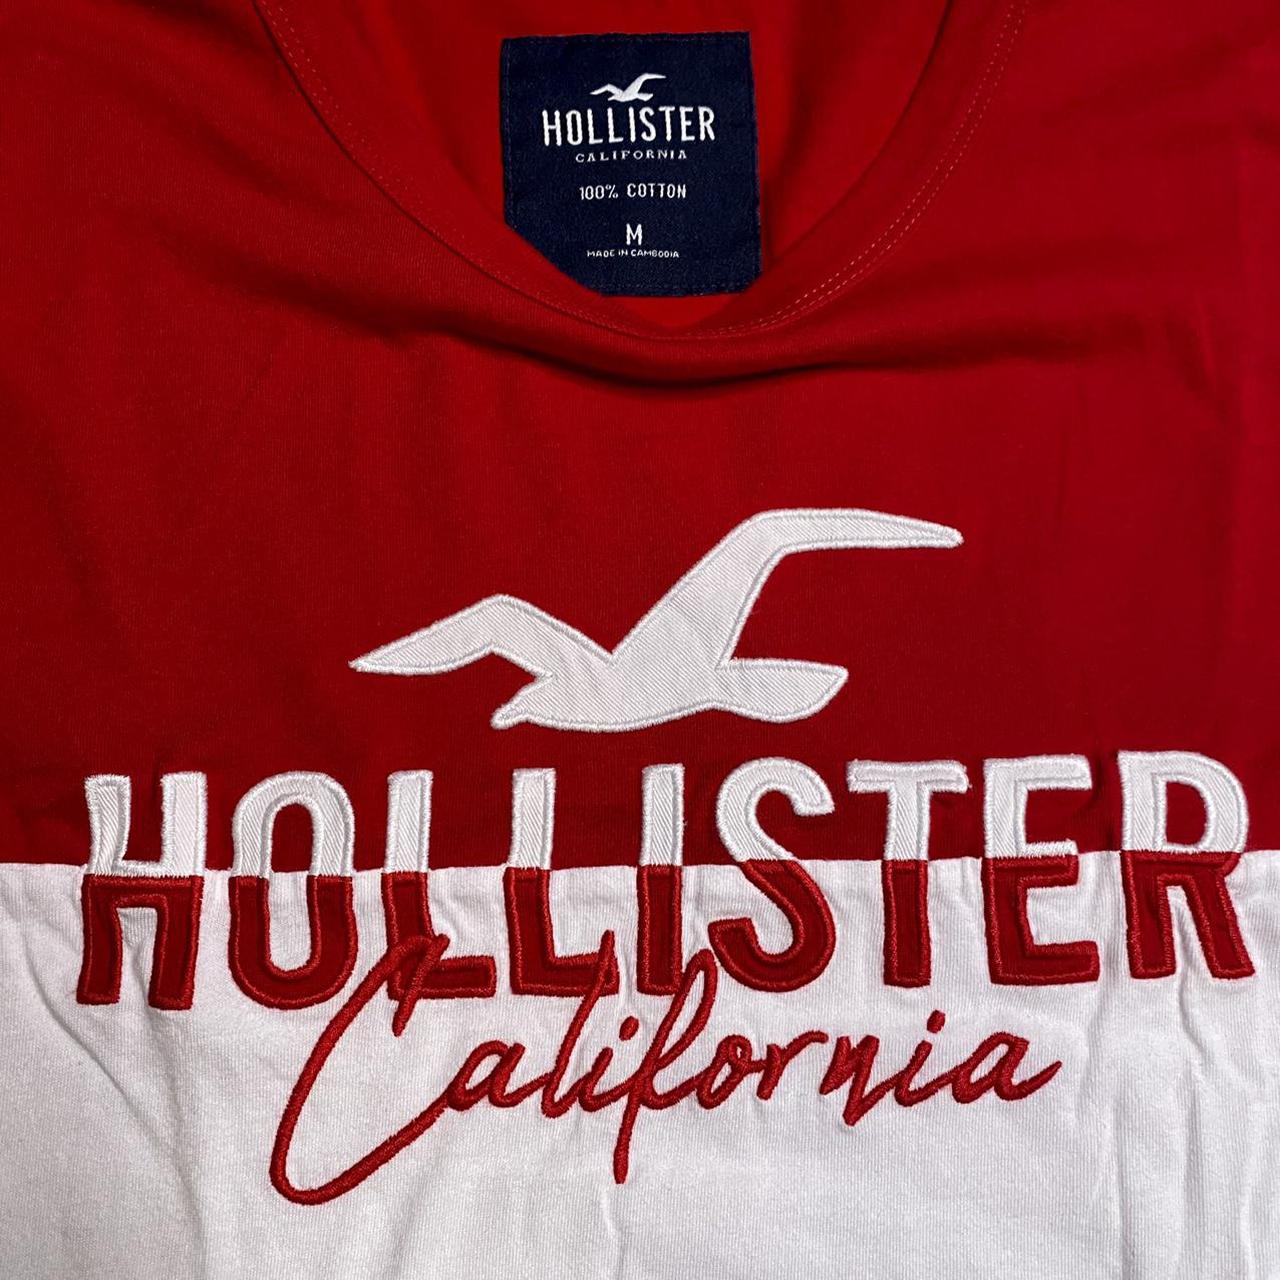 Red and white Hollister tshirt large - Depop